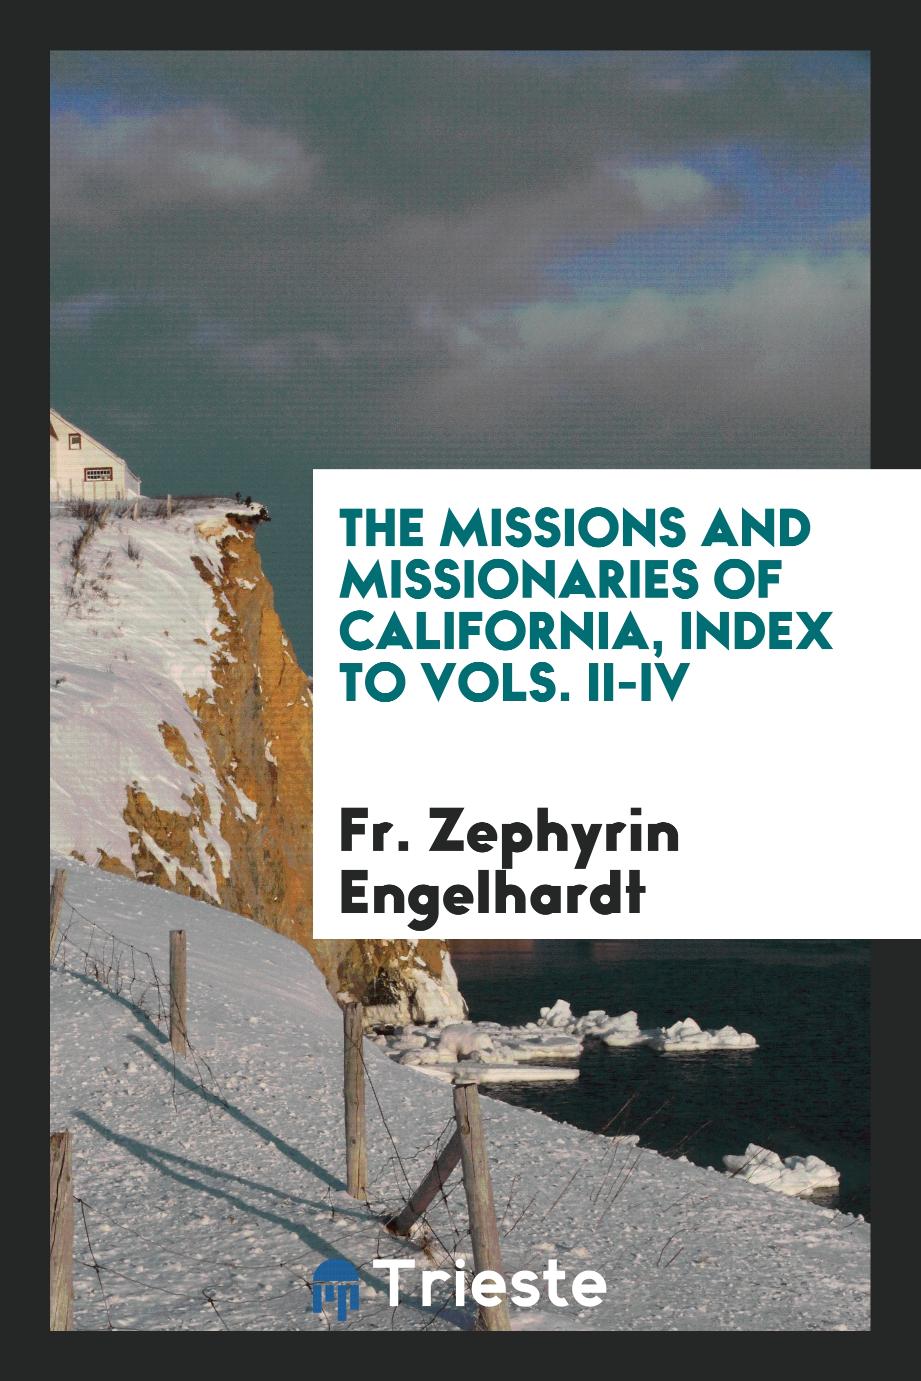 The Missions and Missionaries of California, Index to Vols. II-IV